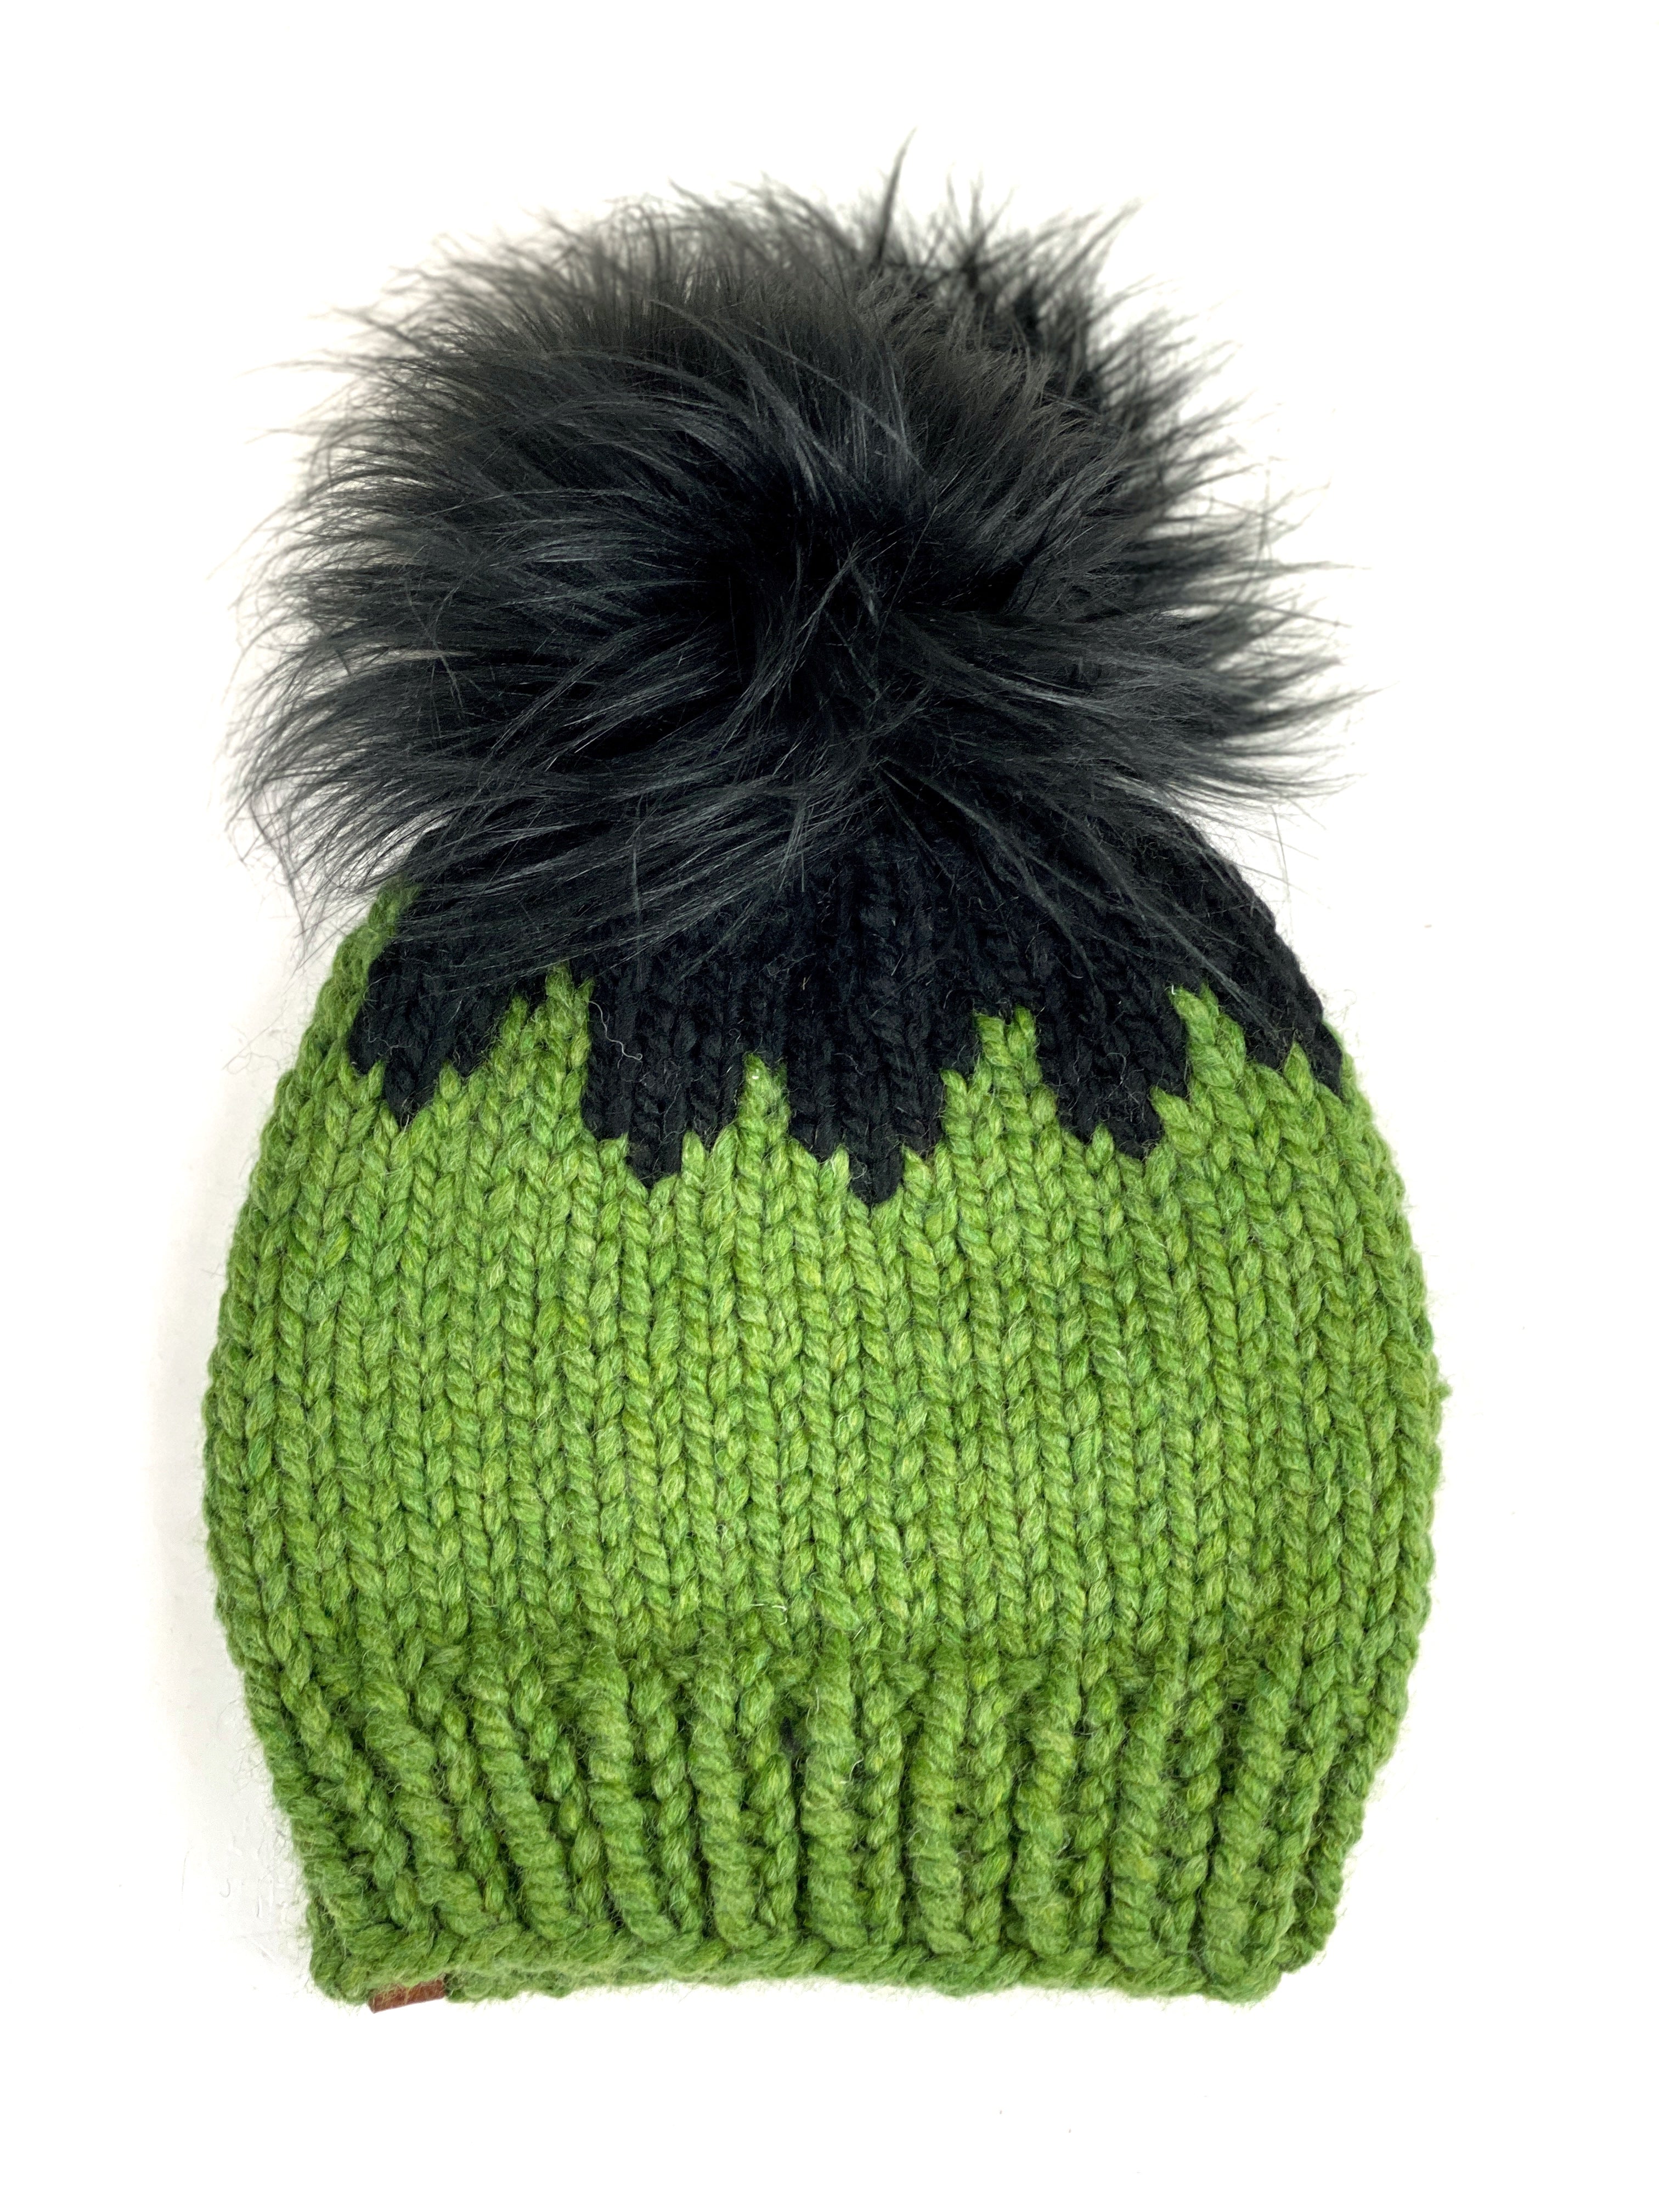 Franken Beanie Halloween Green and Black Hand Knit Hat Adult Womens Size